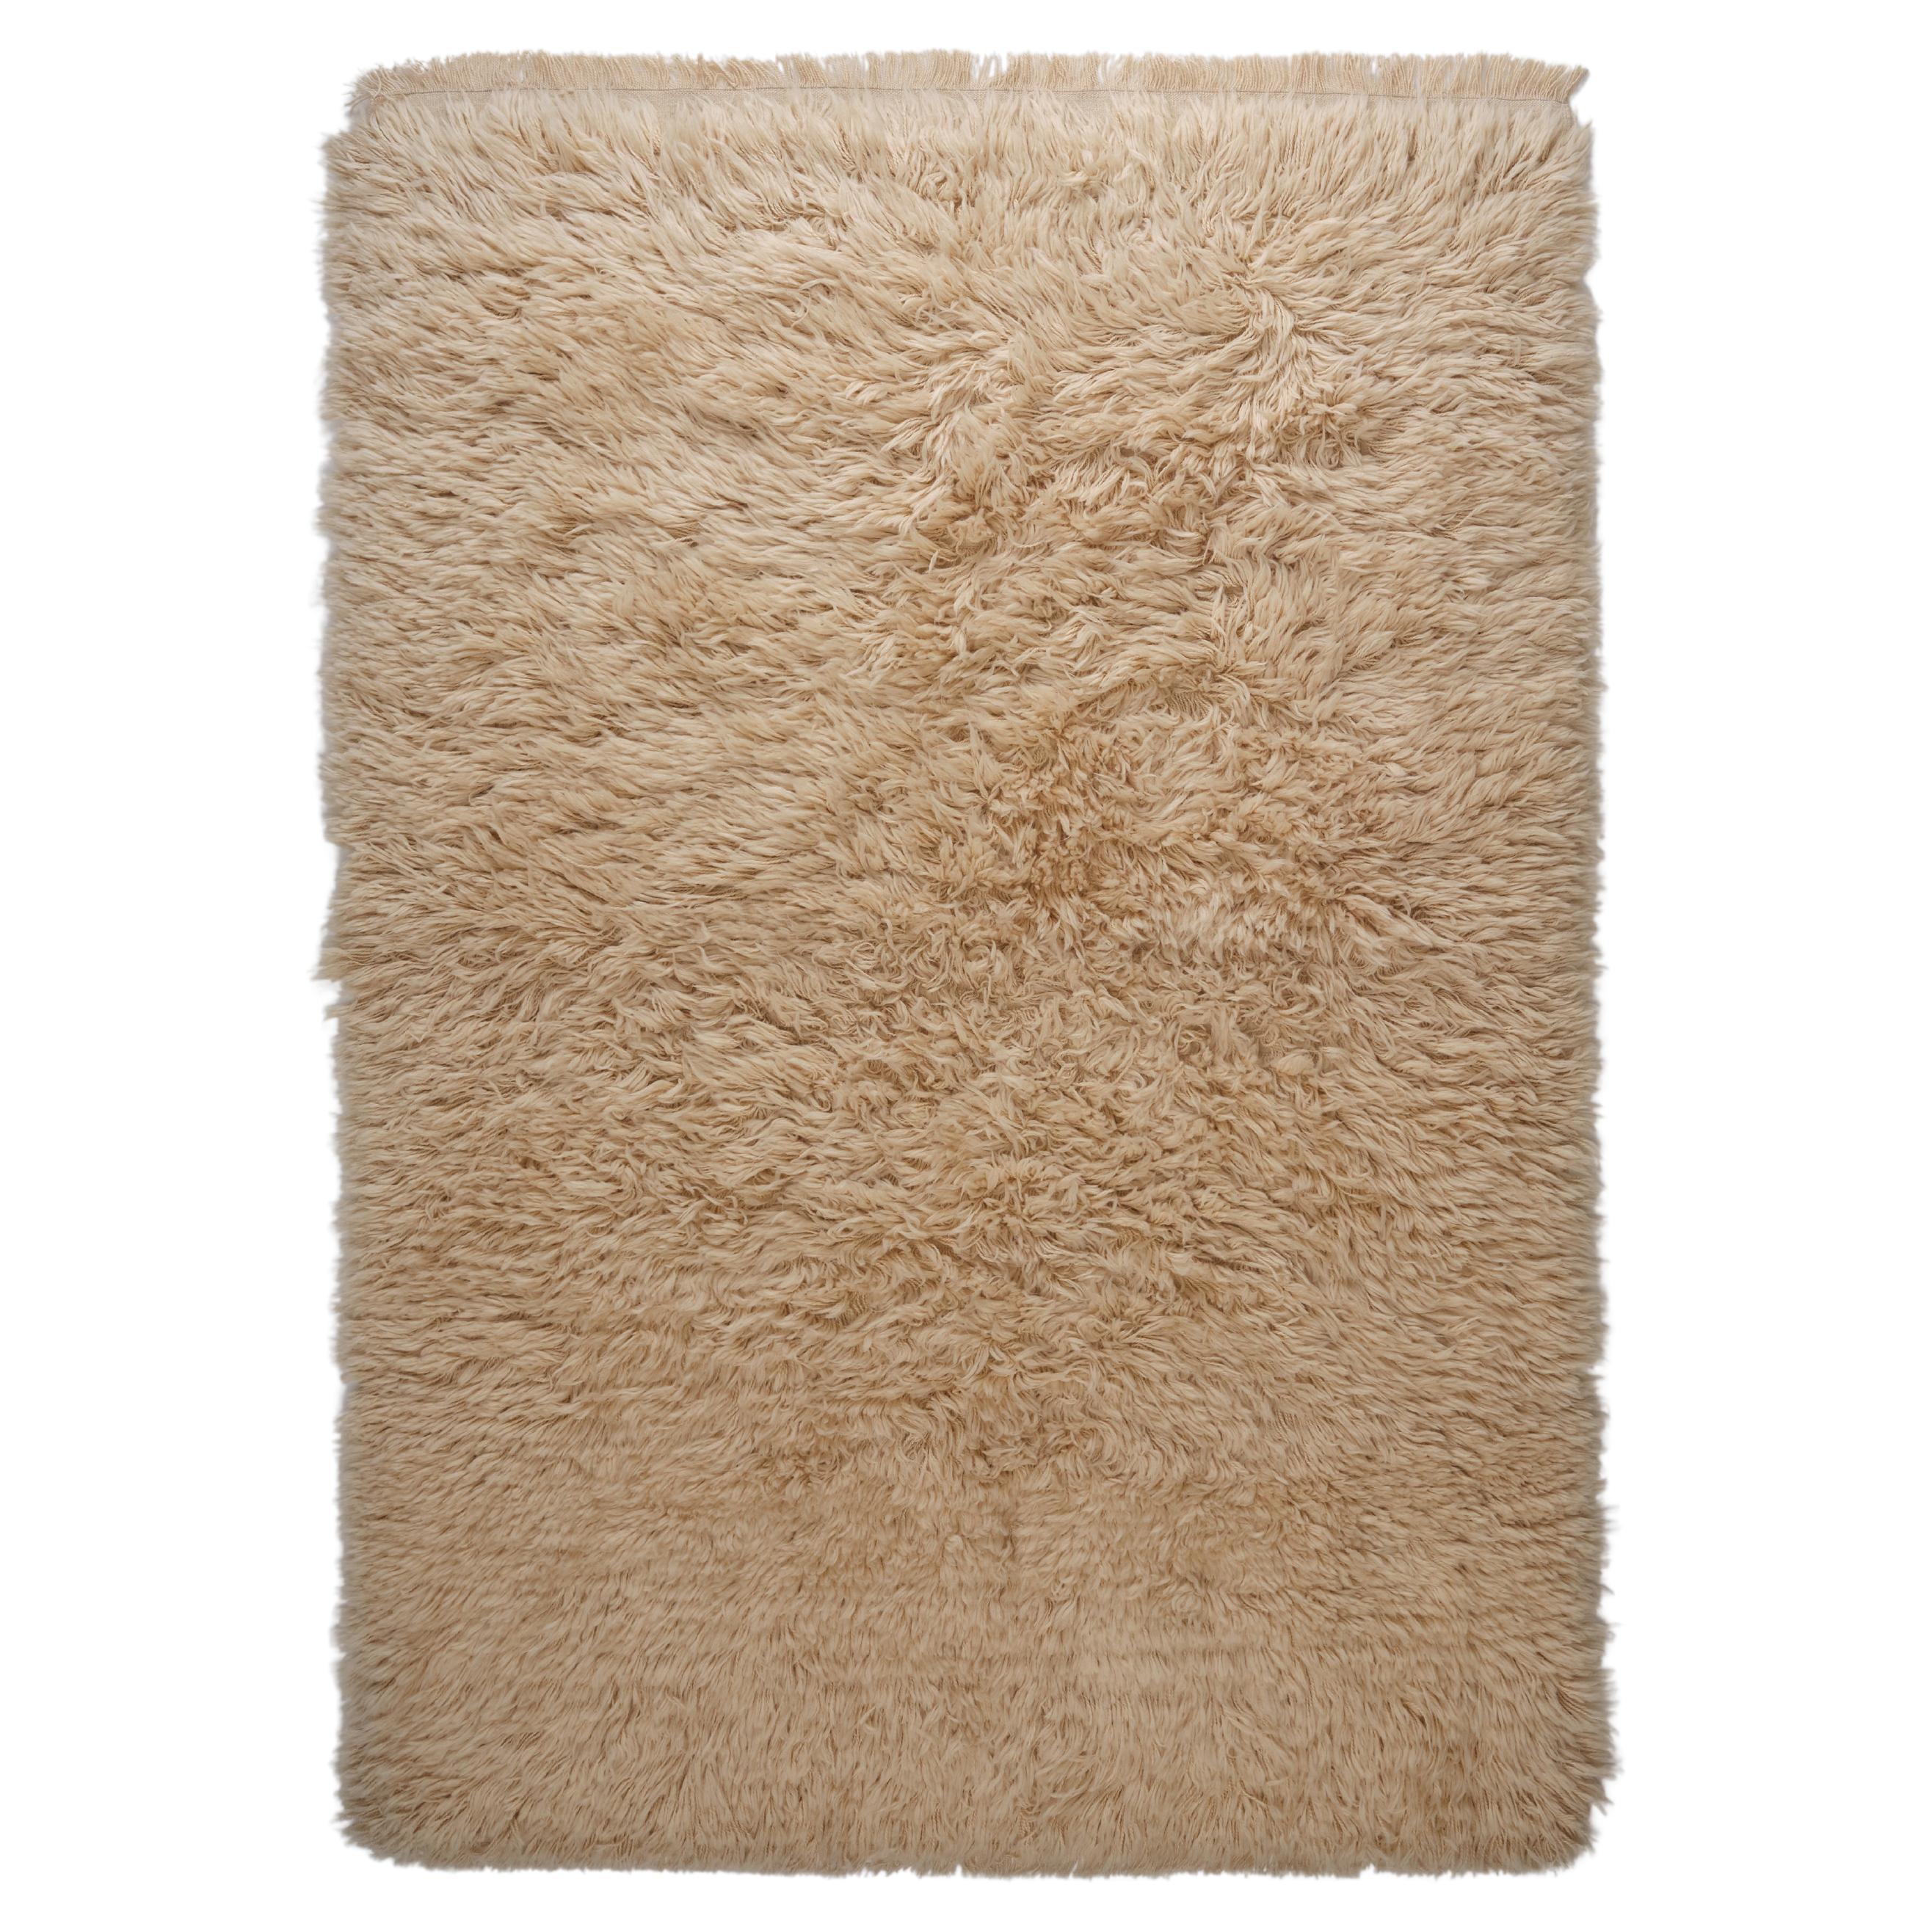 The Forsyth Woolly Shag Rug - Natural, 8x10 For Sale